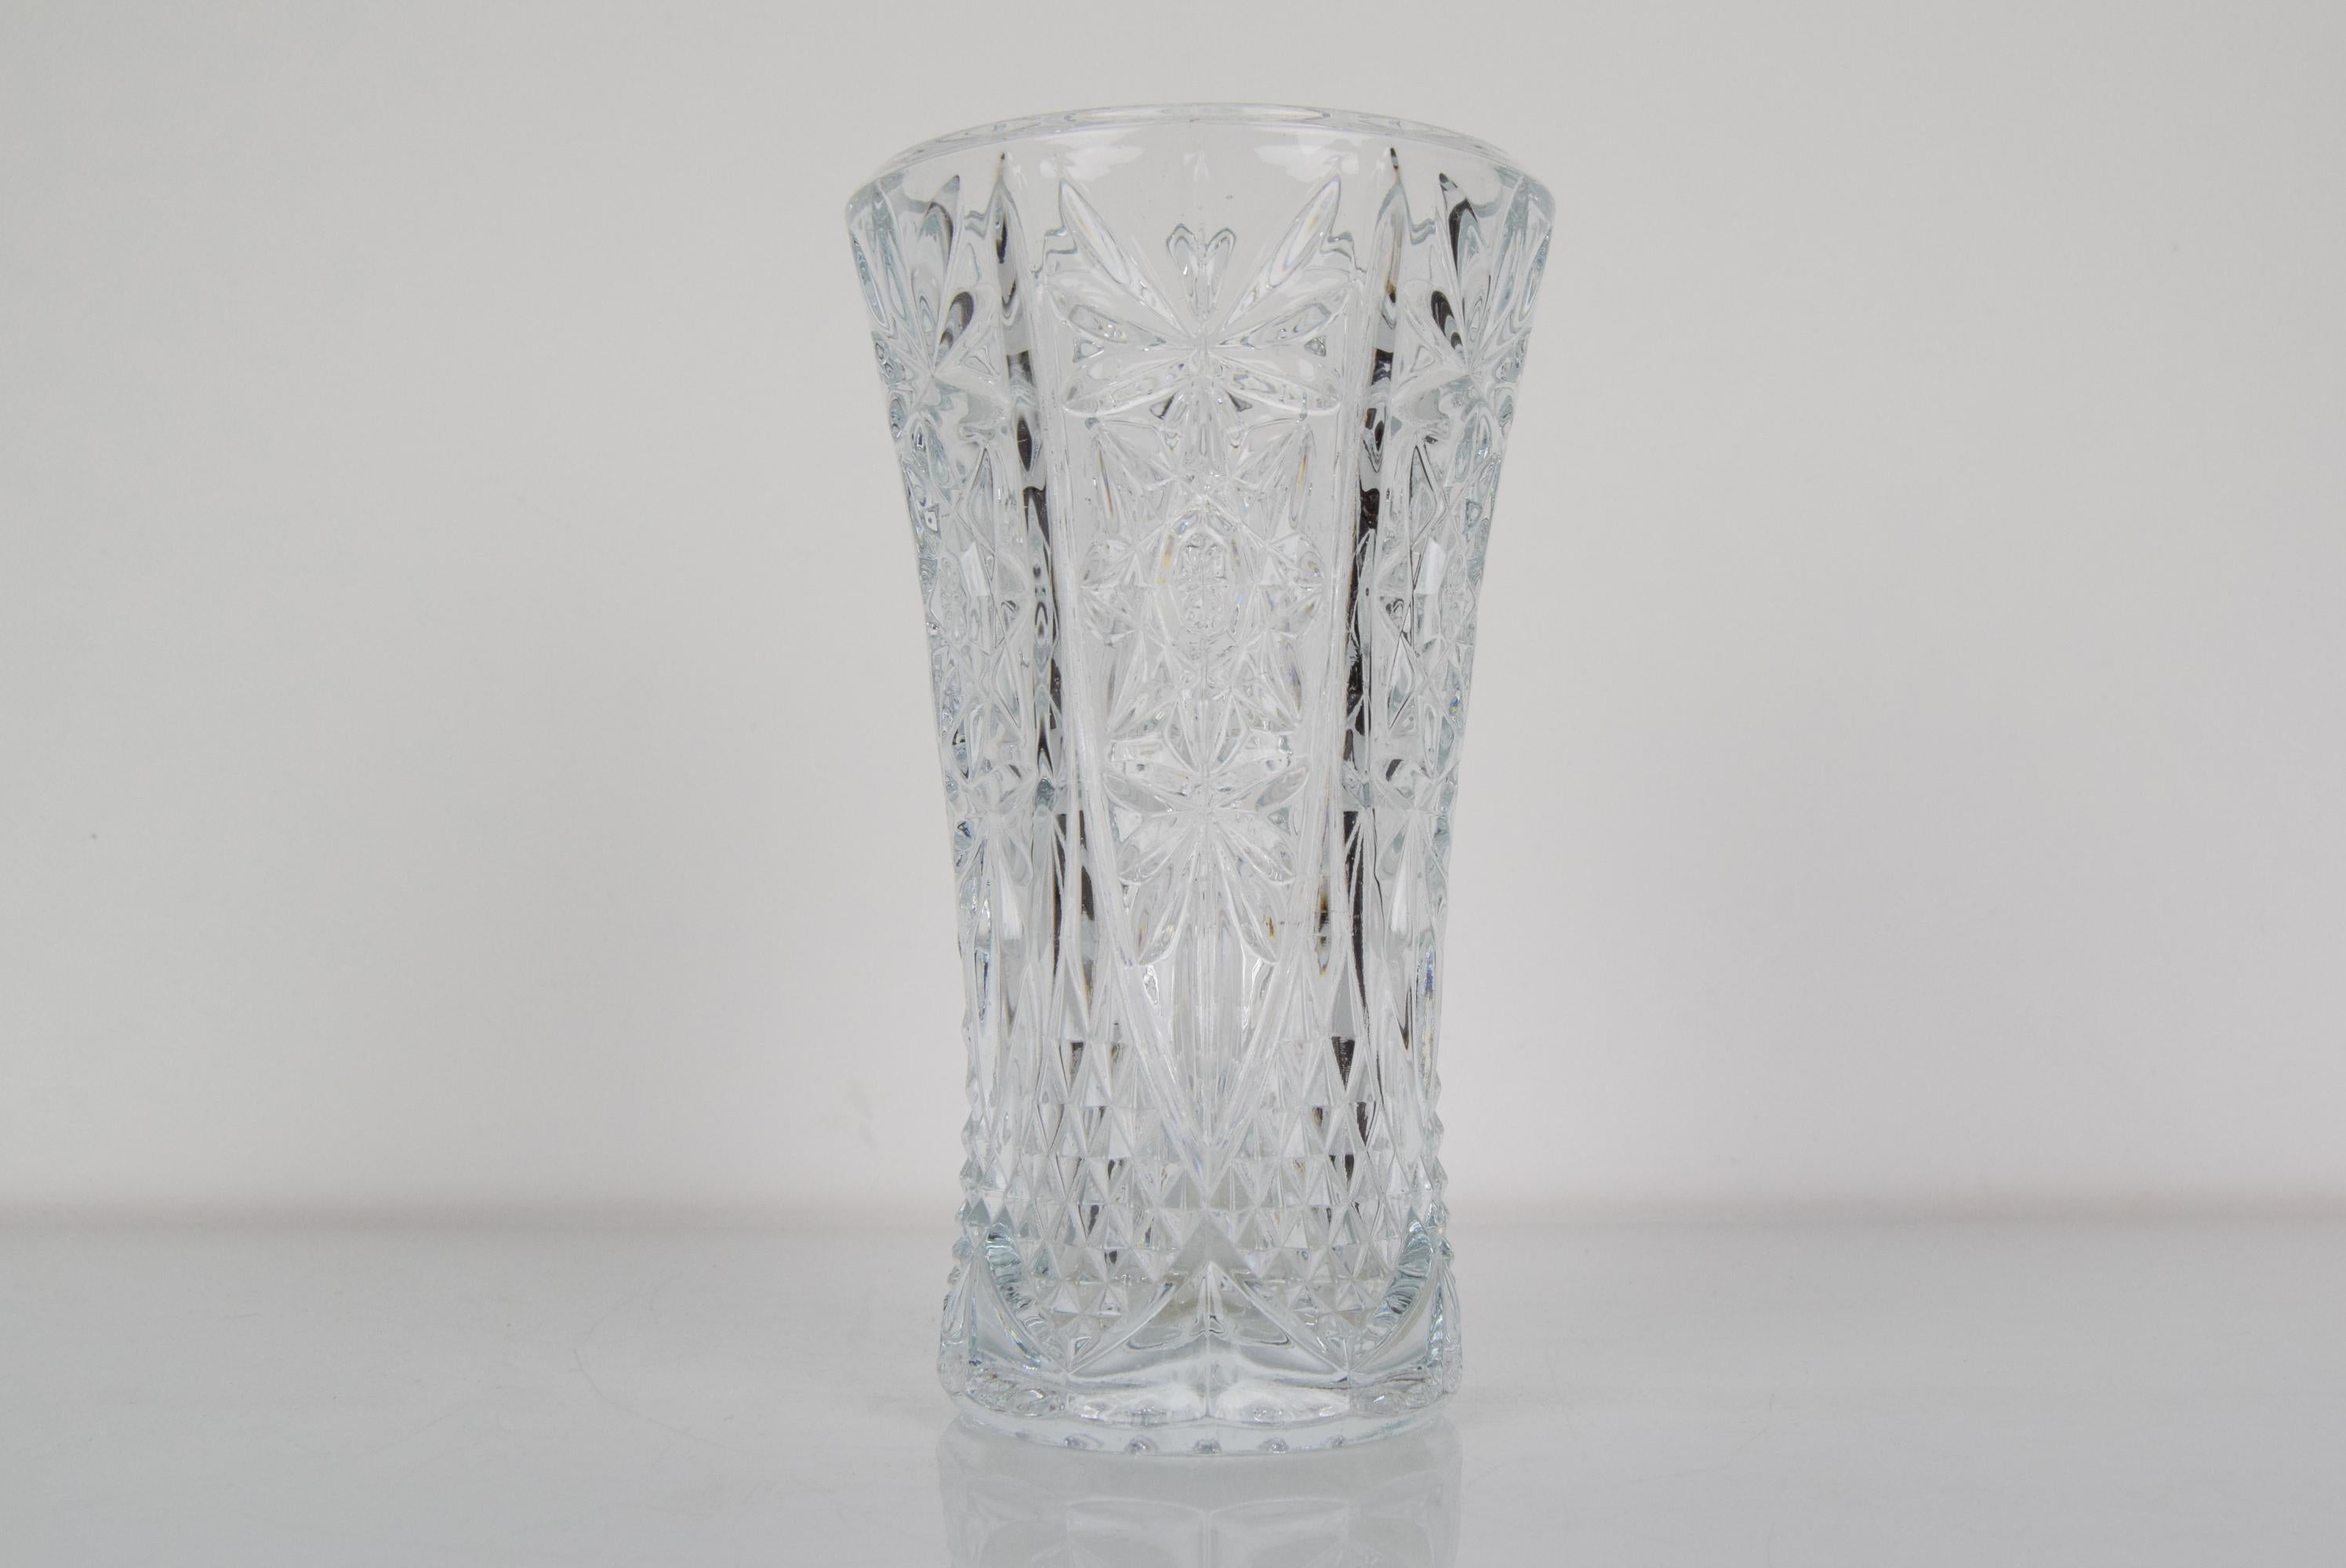 Made in Czechoslovakia
Made of crystal glass
Re-polished
Original condition.